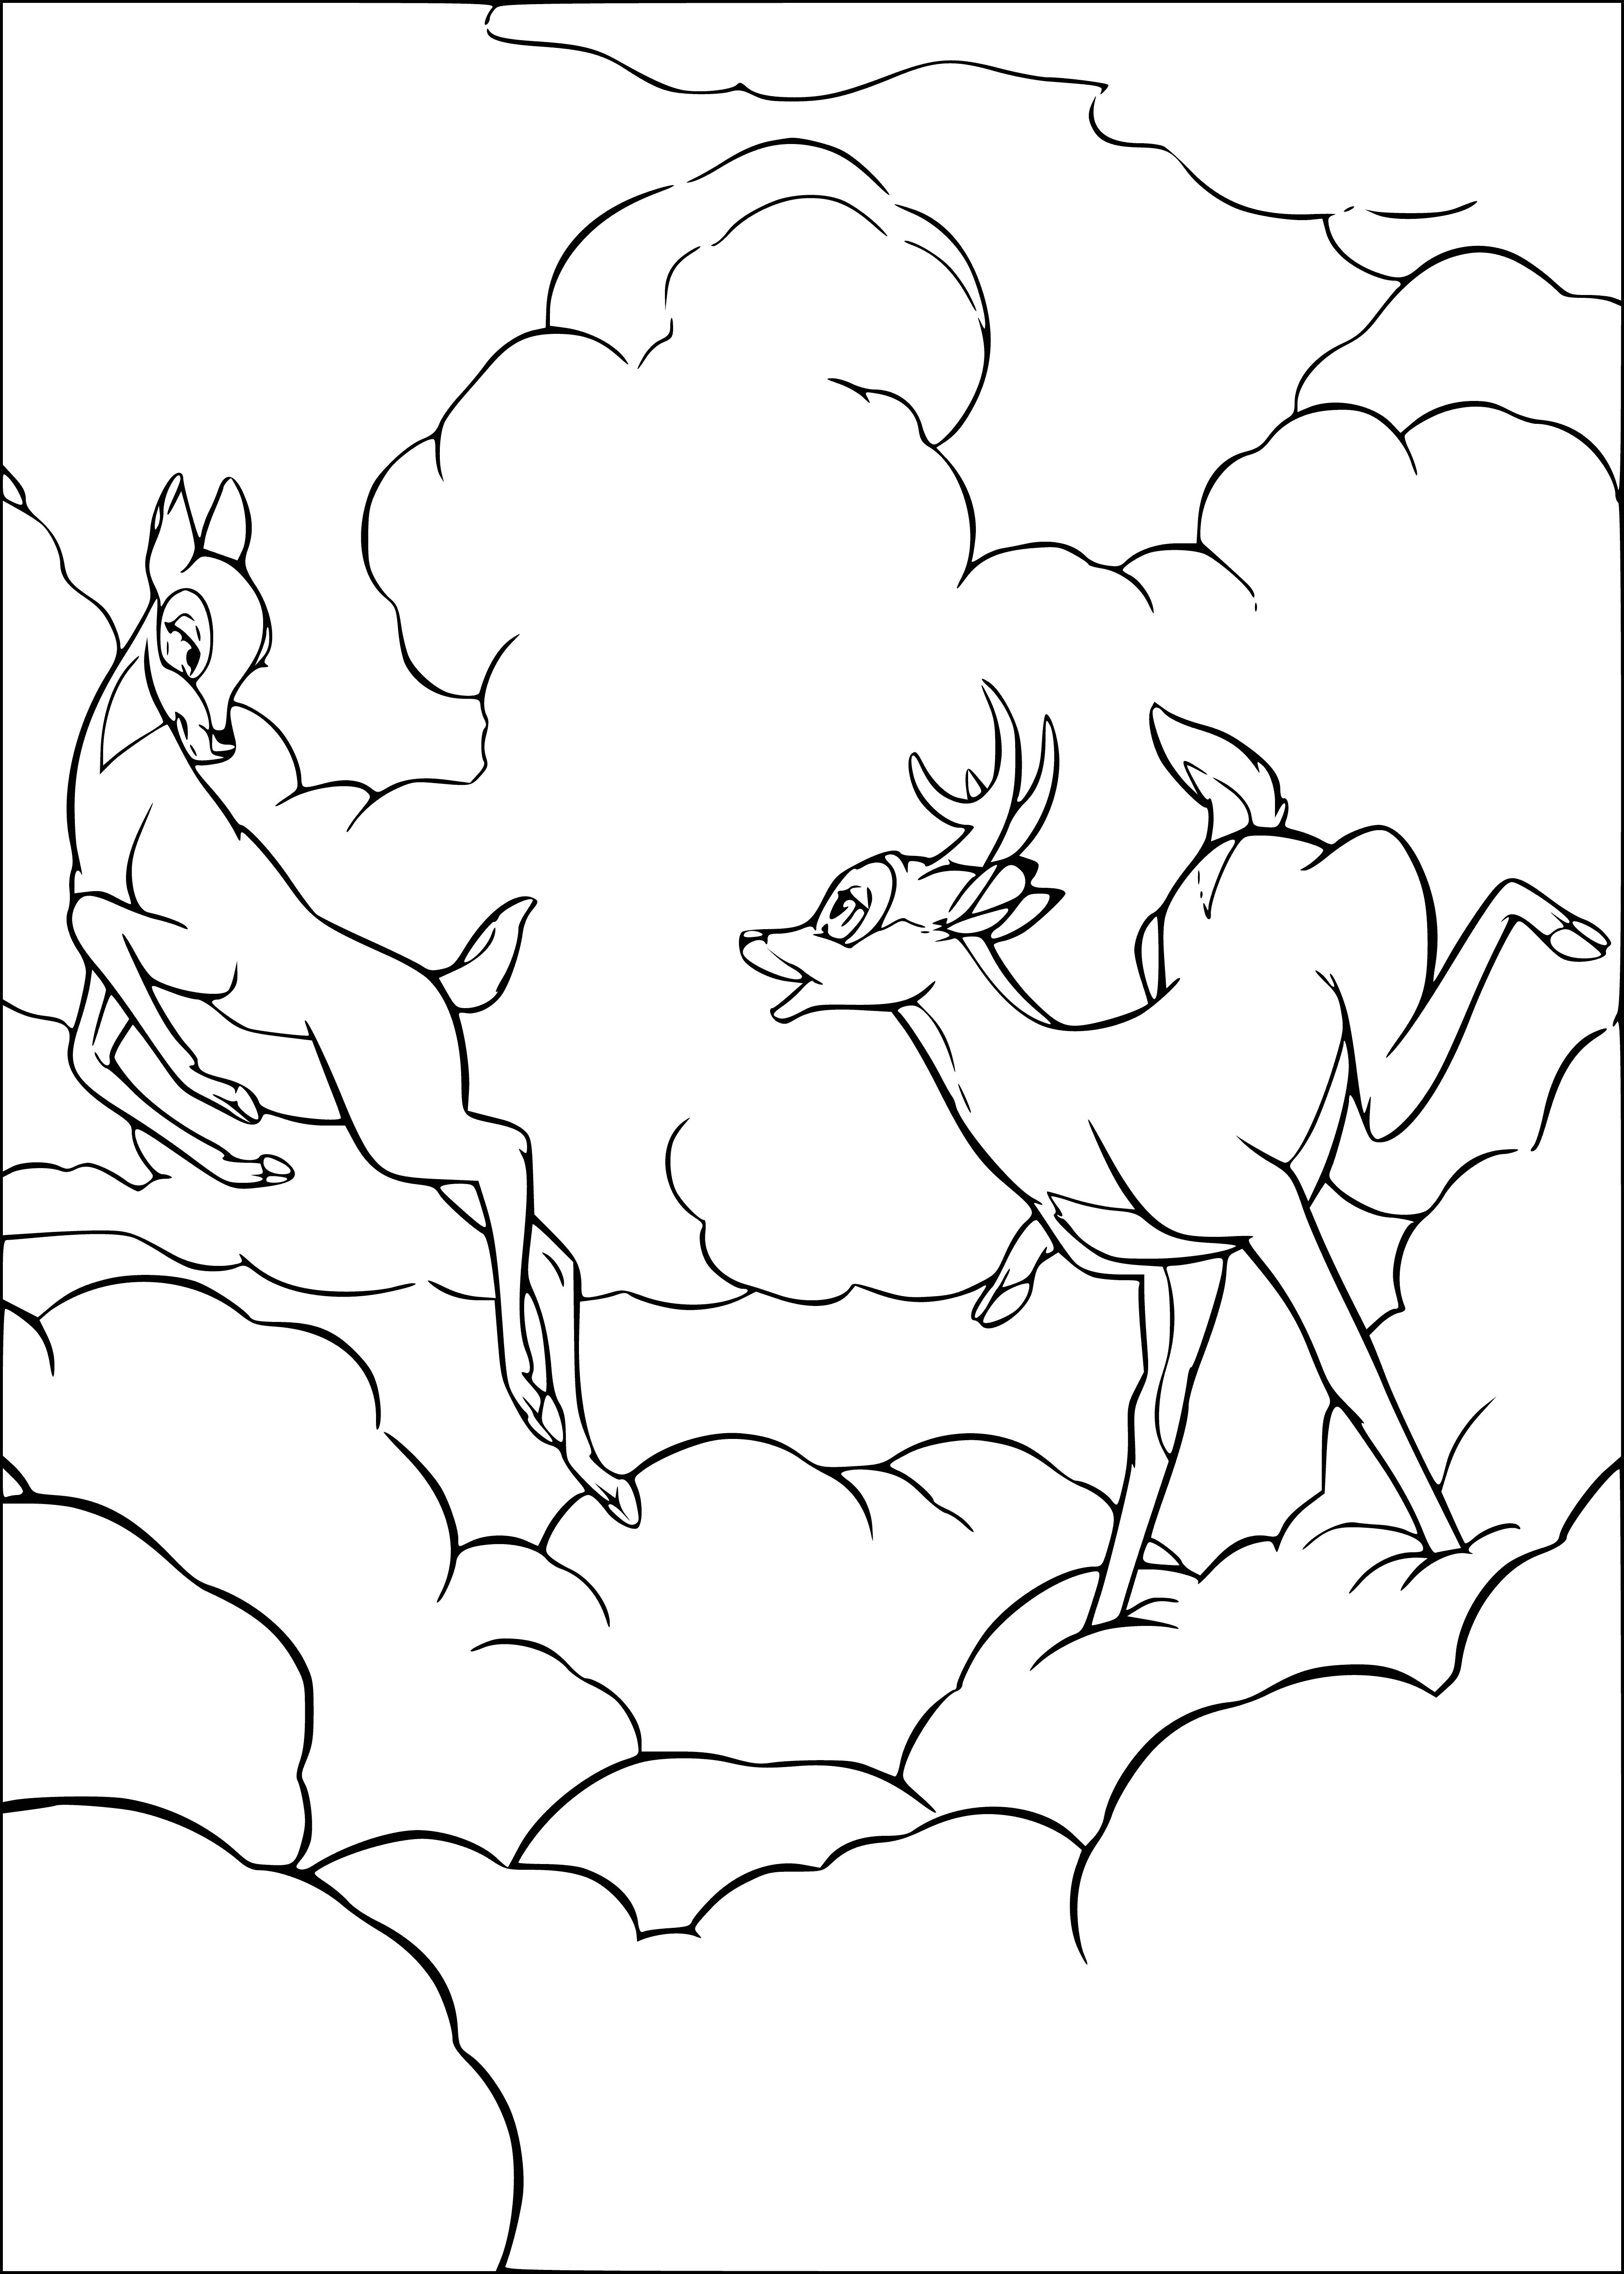 coloring page: Deer in wooded setting has brown coat, white spots, large ears & long neck, facing left.